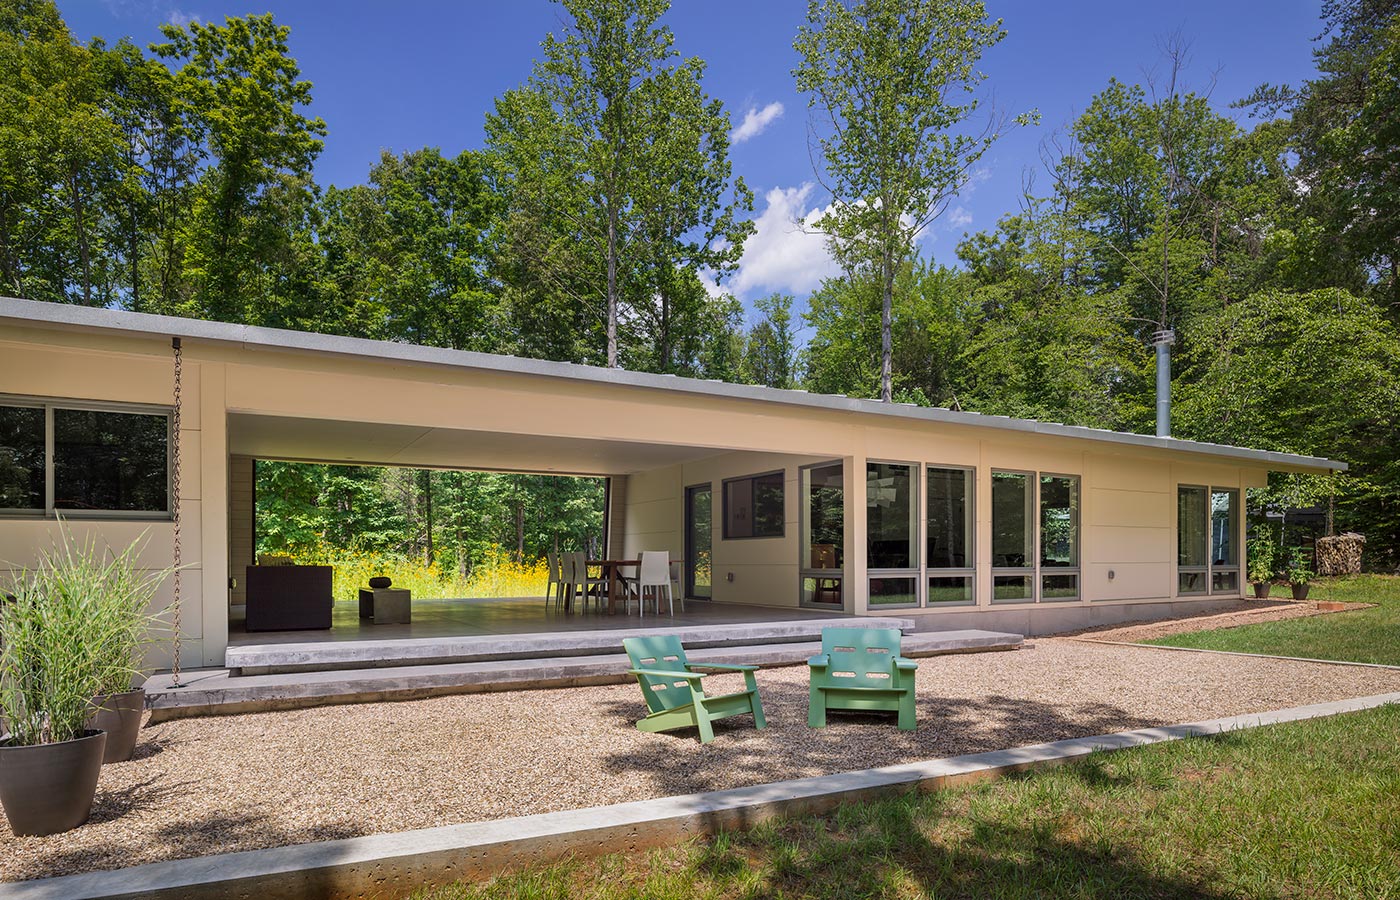 Richmond Road Modern Dogtrot House with Open Covered Porch Between Living Area and Bedrooms with Hardipanel Siding and Wildflower Meadow beyond by Chris Hays, Charlottesville-based Architect of HEDS.